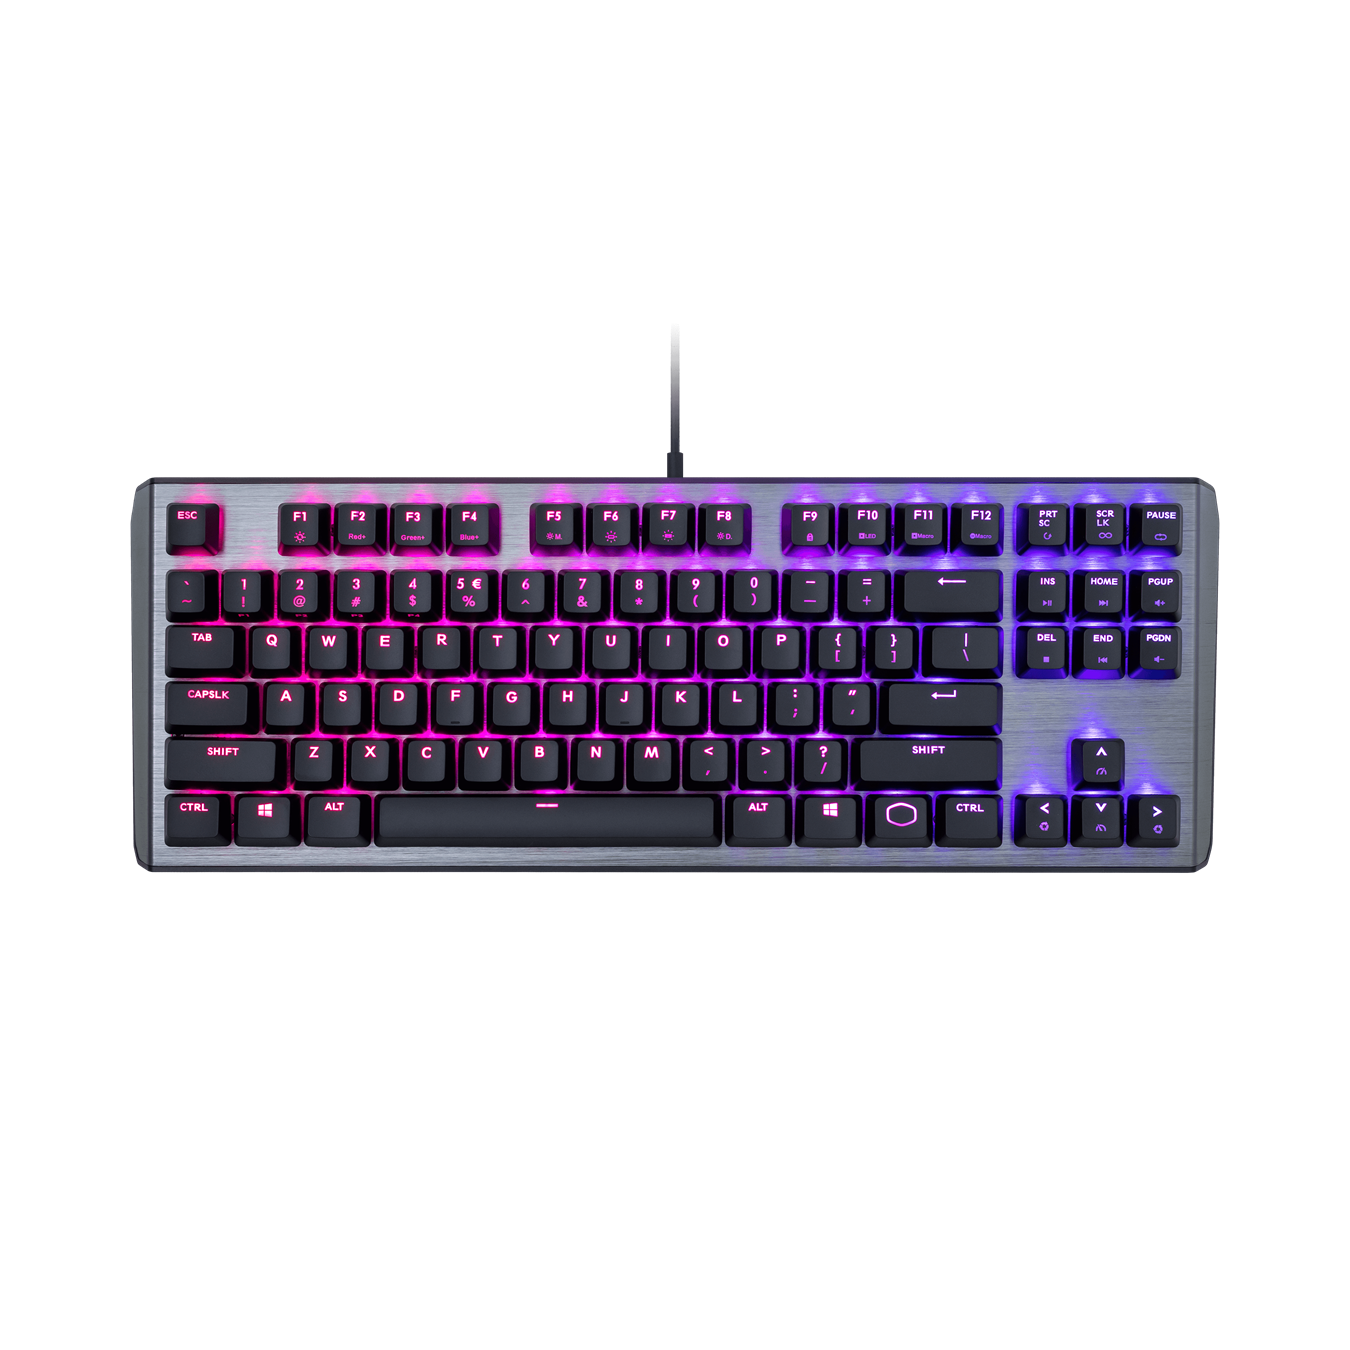 CK530 Mechanical Gaming Keyboard - Rated for a 50 million+ lifepan to never let you down in the heat of battle